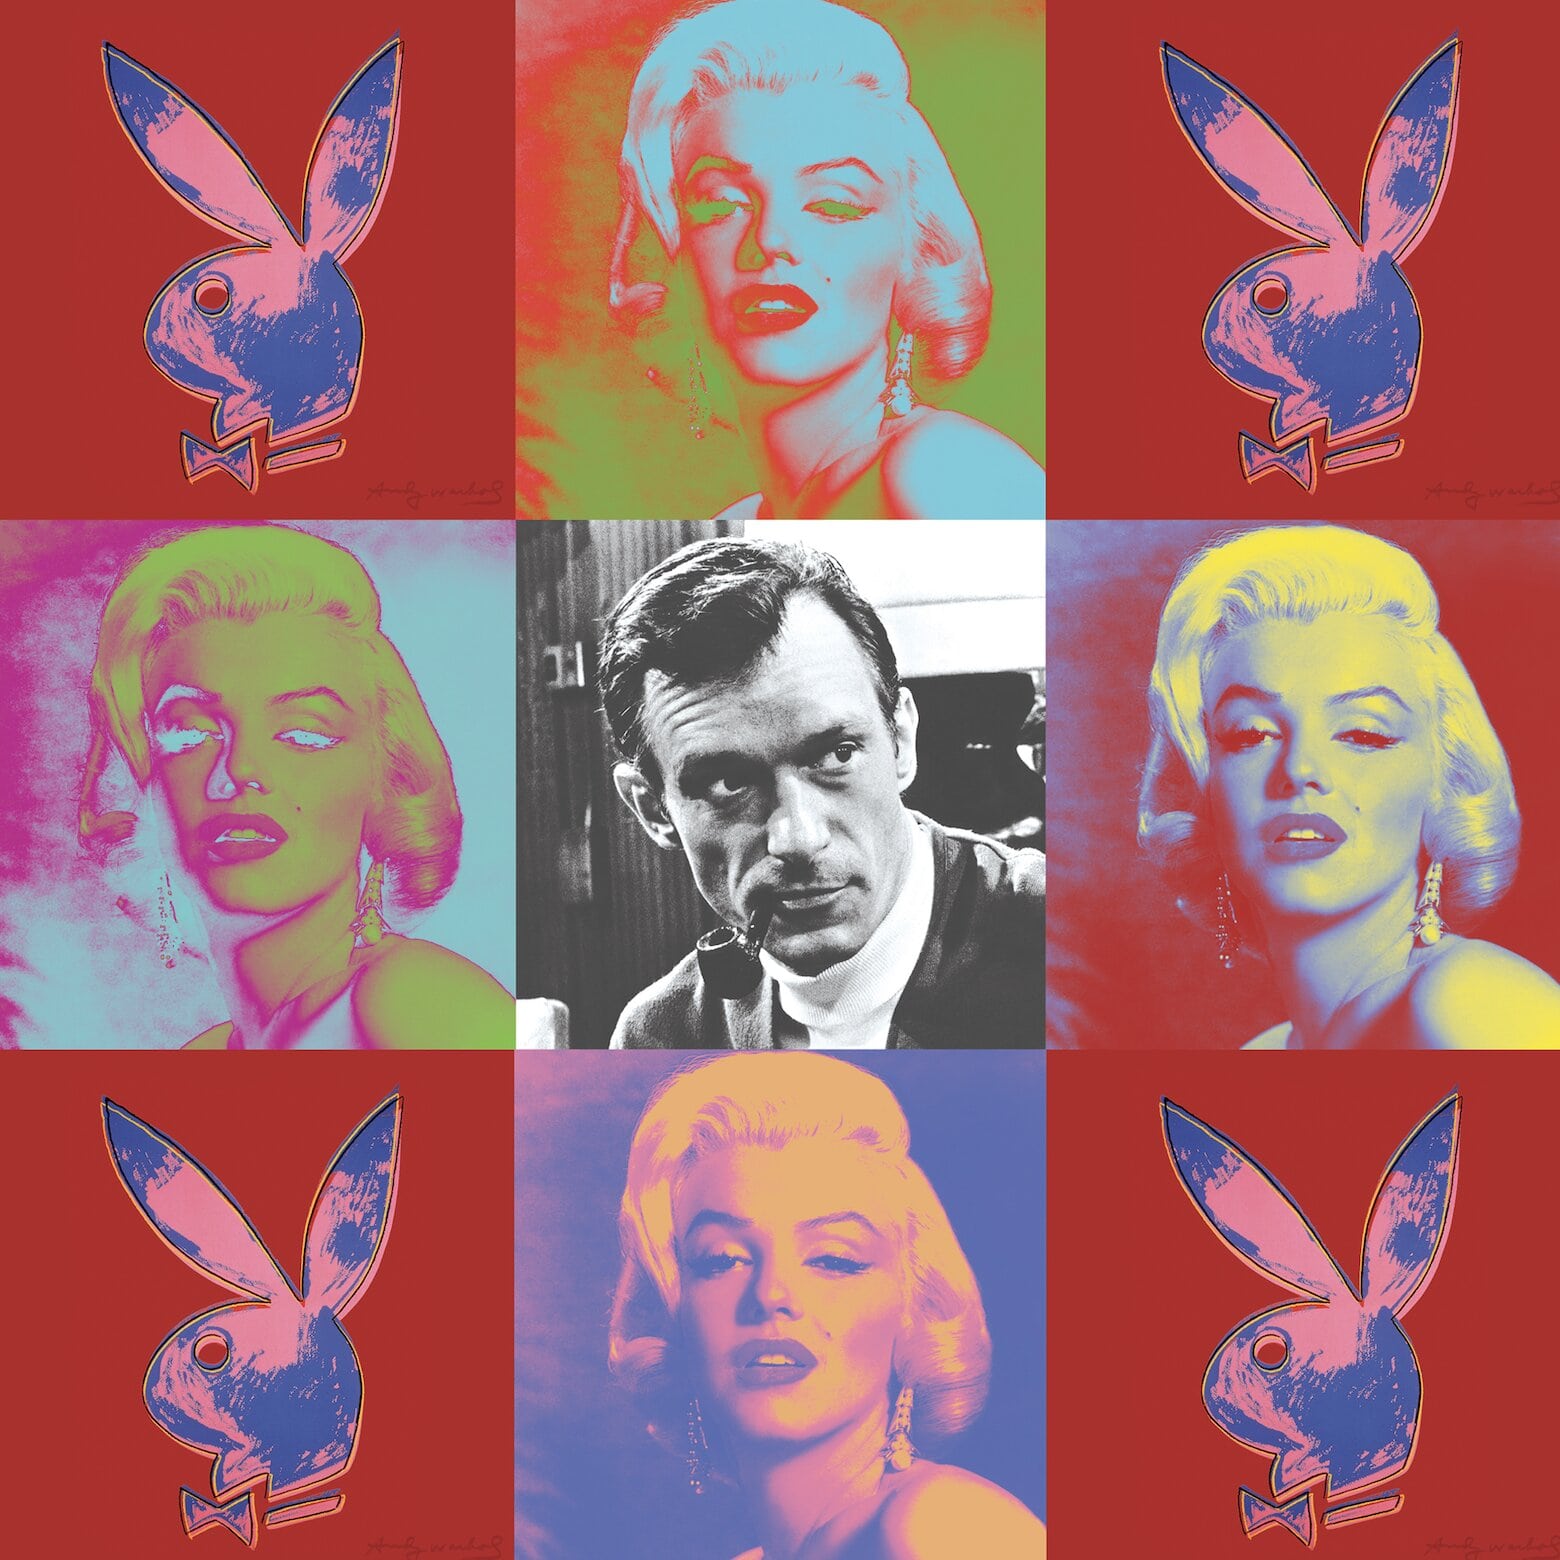 Highlights from the  “Icons: Playboy, Hugh Hefner, and Marilyn Monroe" will be heading to Hong Kong and Shanghai for two special exhibitions before going under the hammer